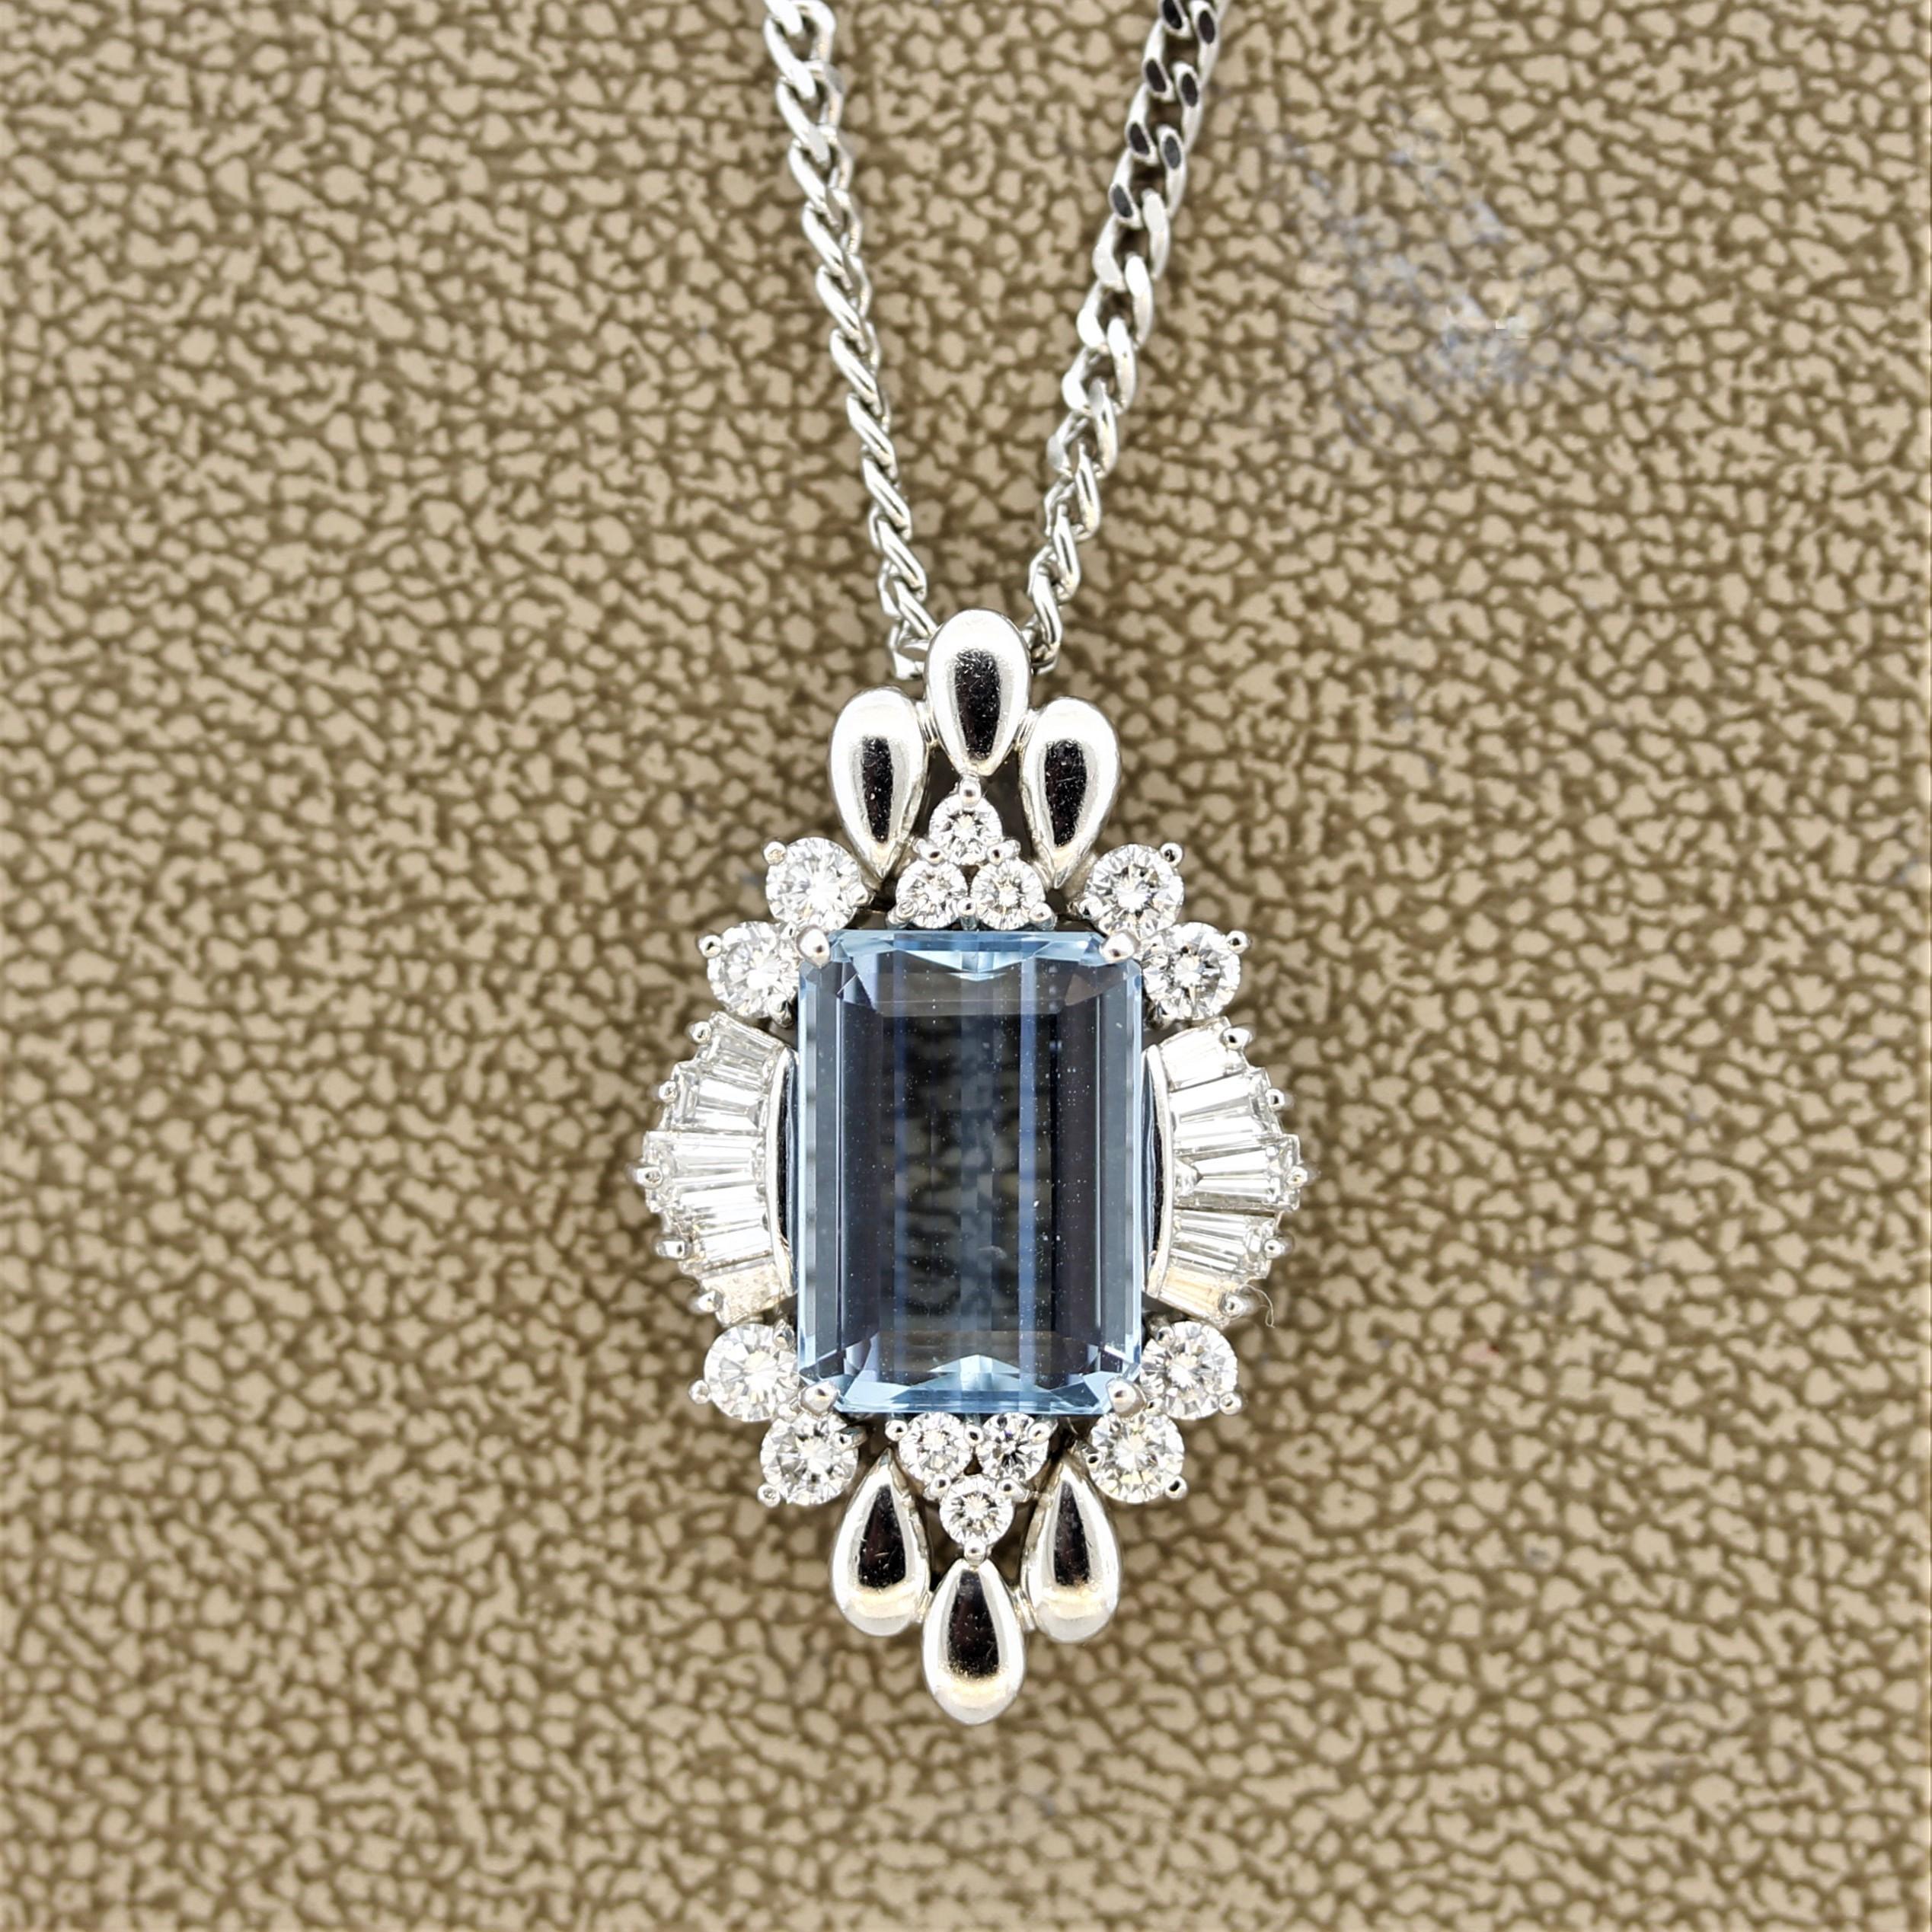 Truly one of our favorite aquamarine pieces. The pendant features an extra fine 4.88 carat aquamarine with a bright sea blue color. It is cut in an emerald shape with excellent proportions. Accenting the aquamarine are 1.20 carats of baguette and